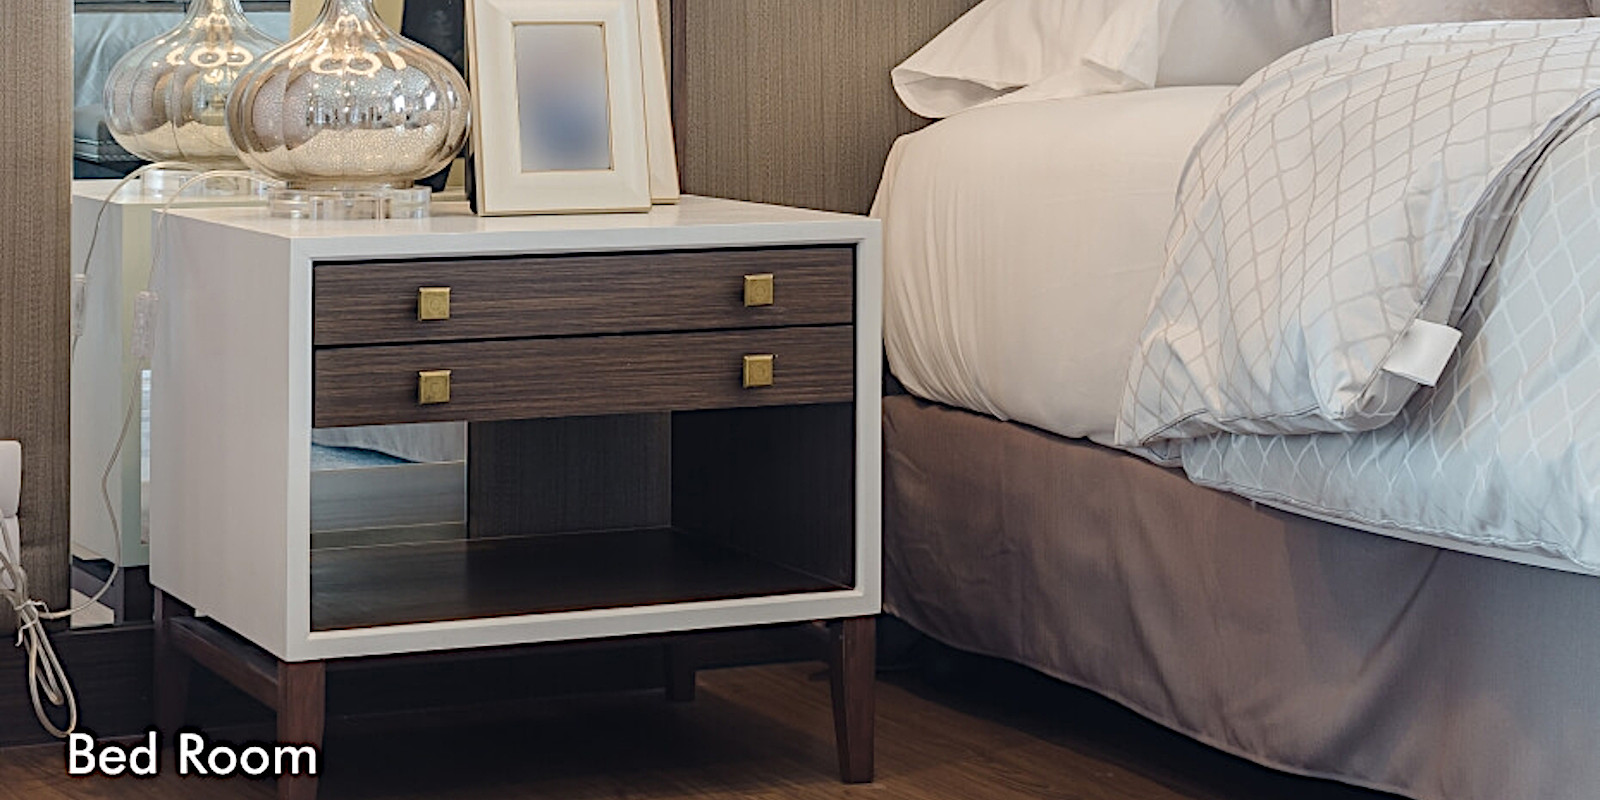 Bedroom furniture discounted